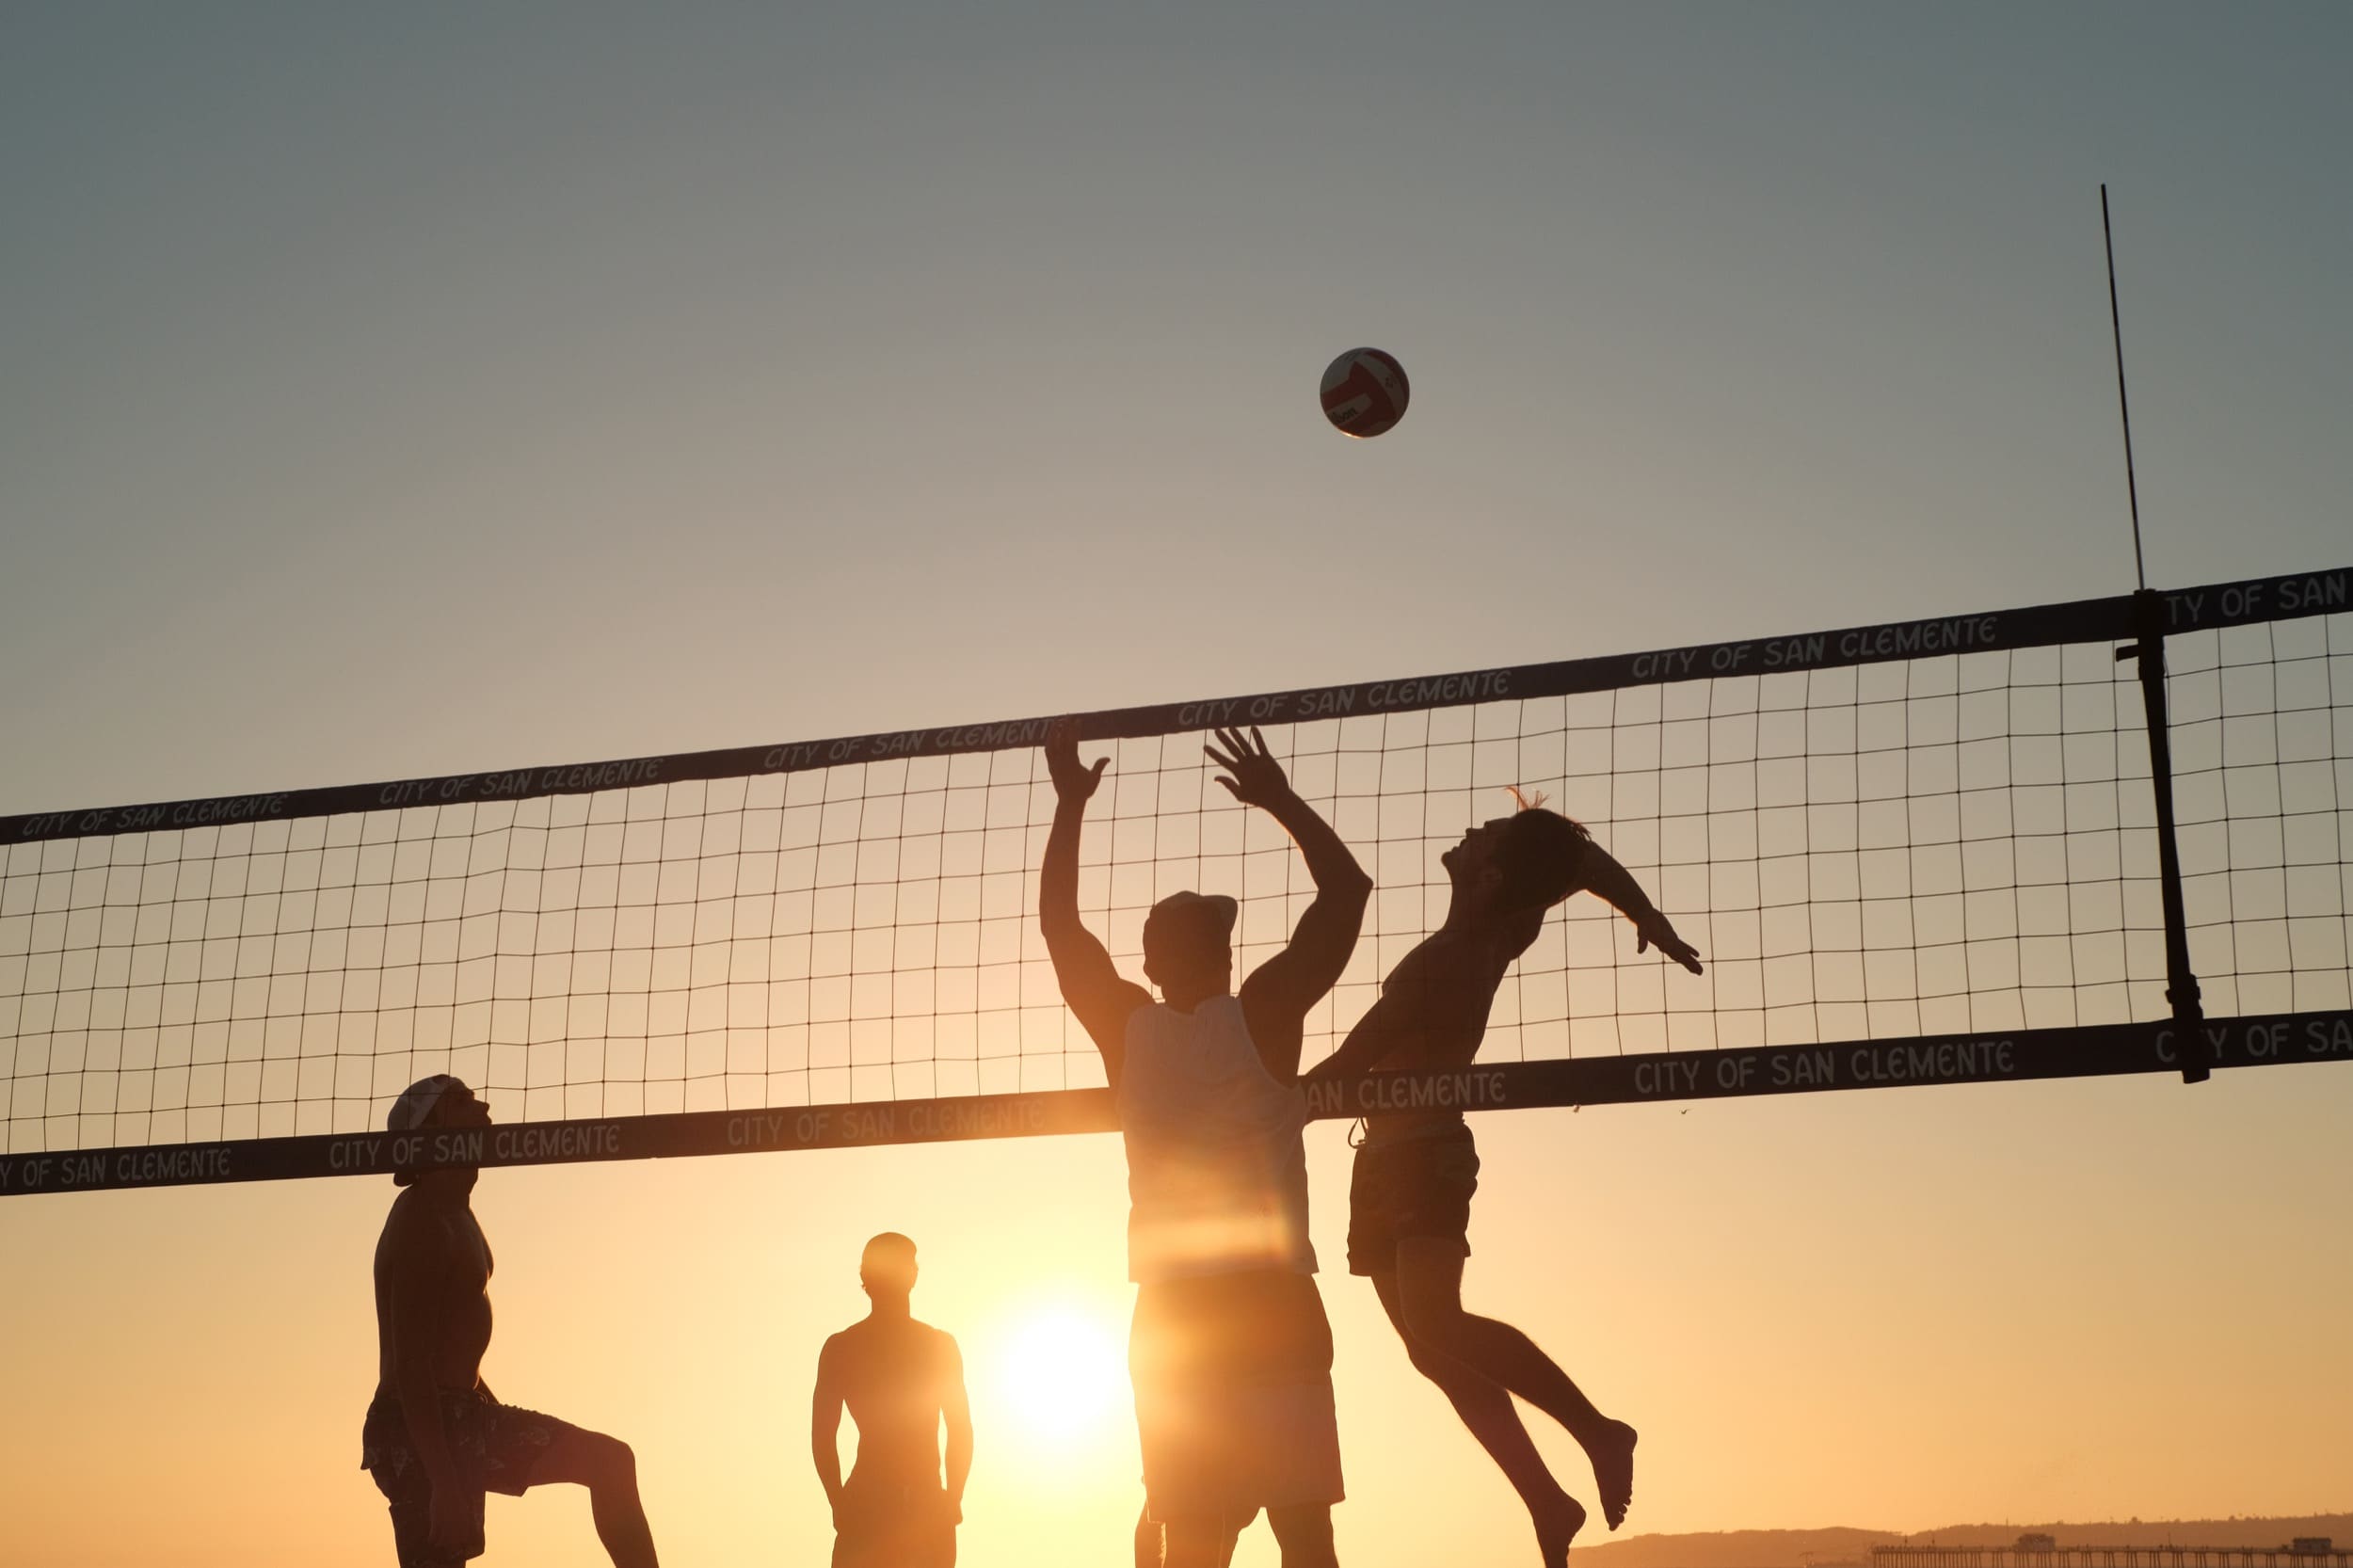 Sports photography, dudes playing volleyball.